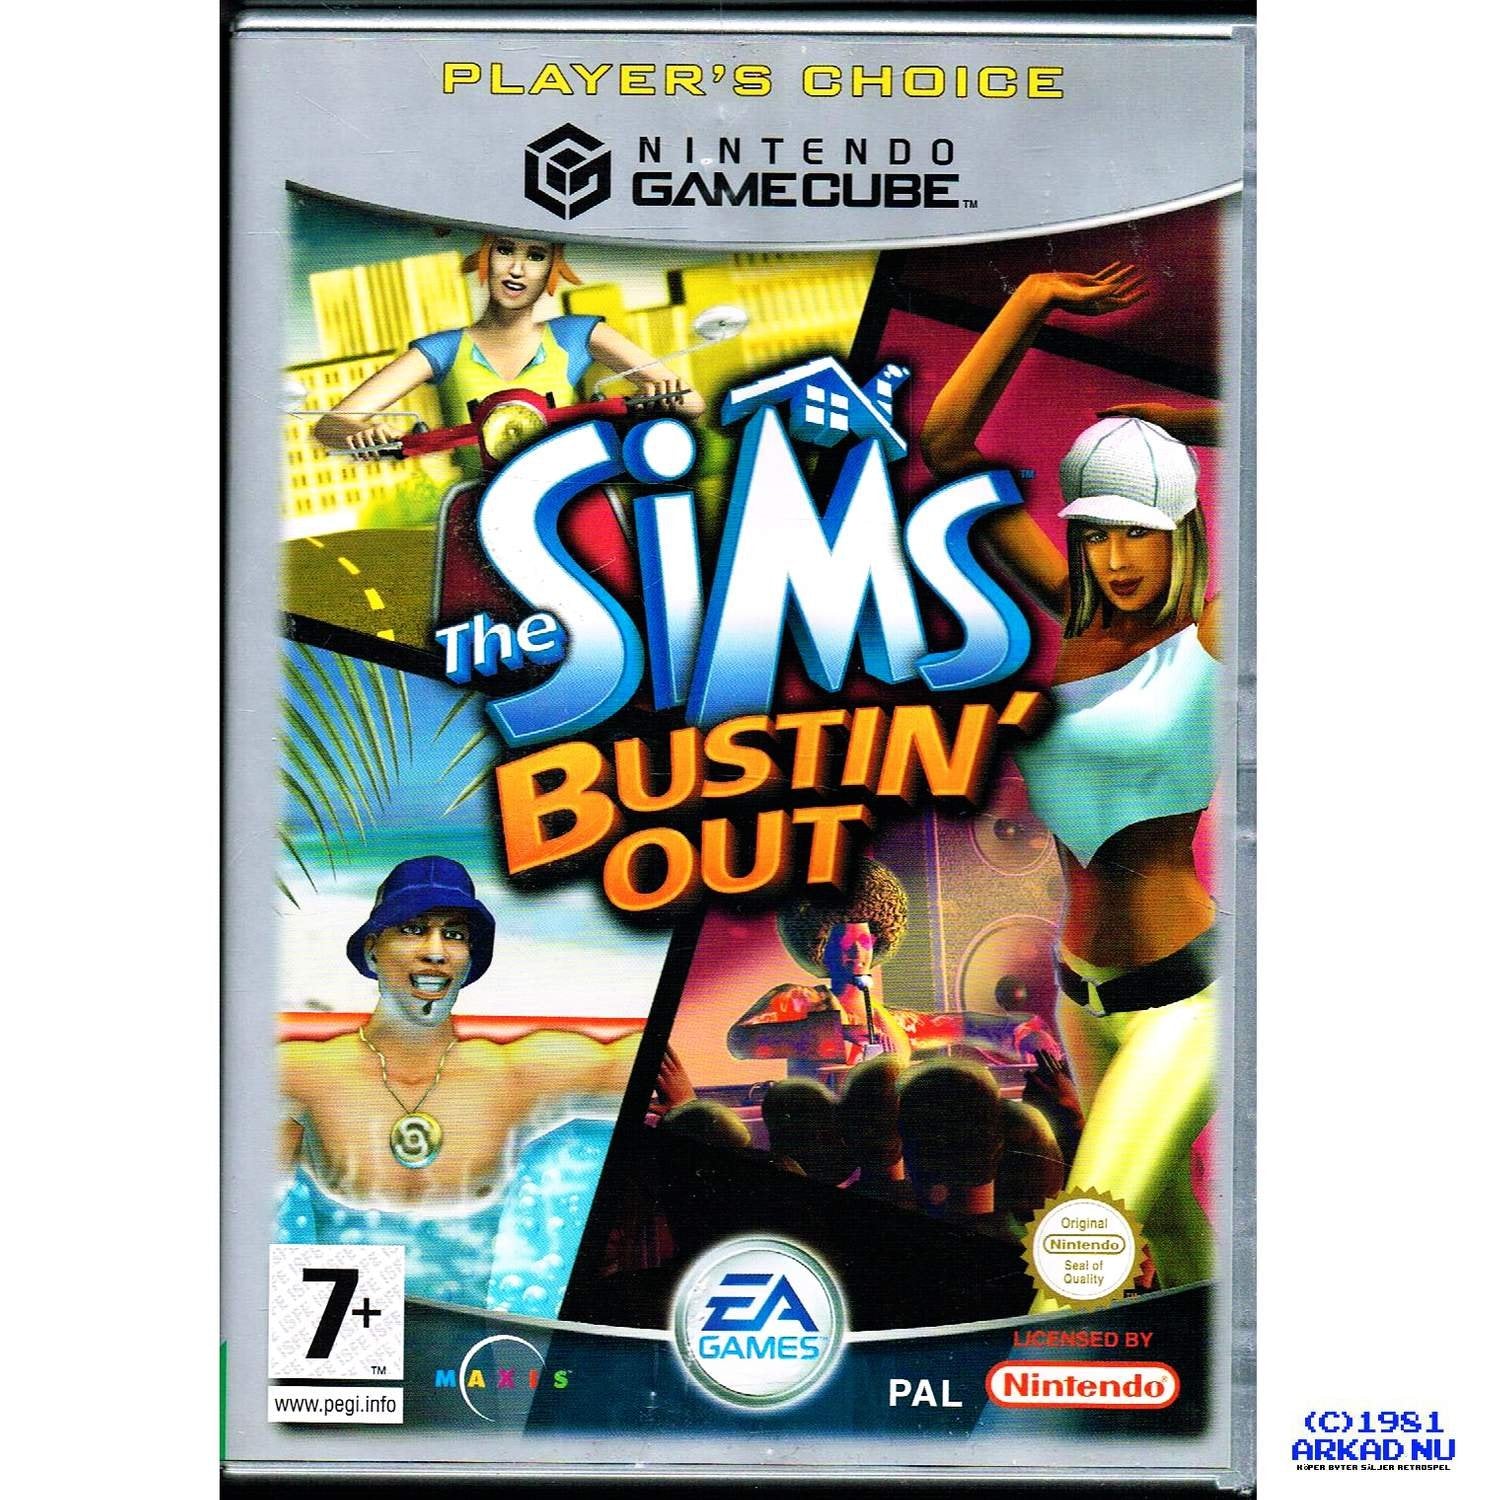 Game | Nintendo GameCube | The Sims Bustin' Out [Player's Choice]